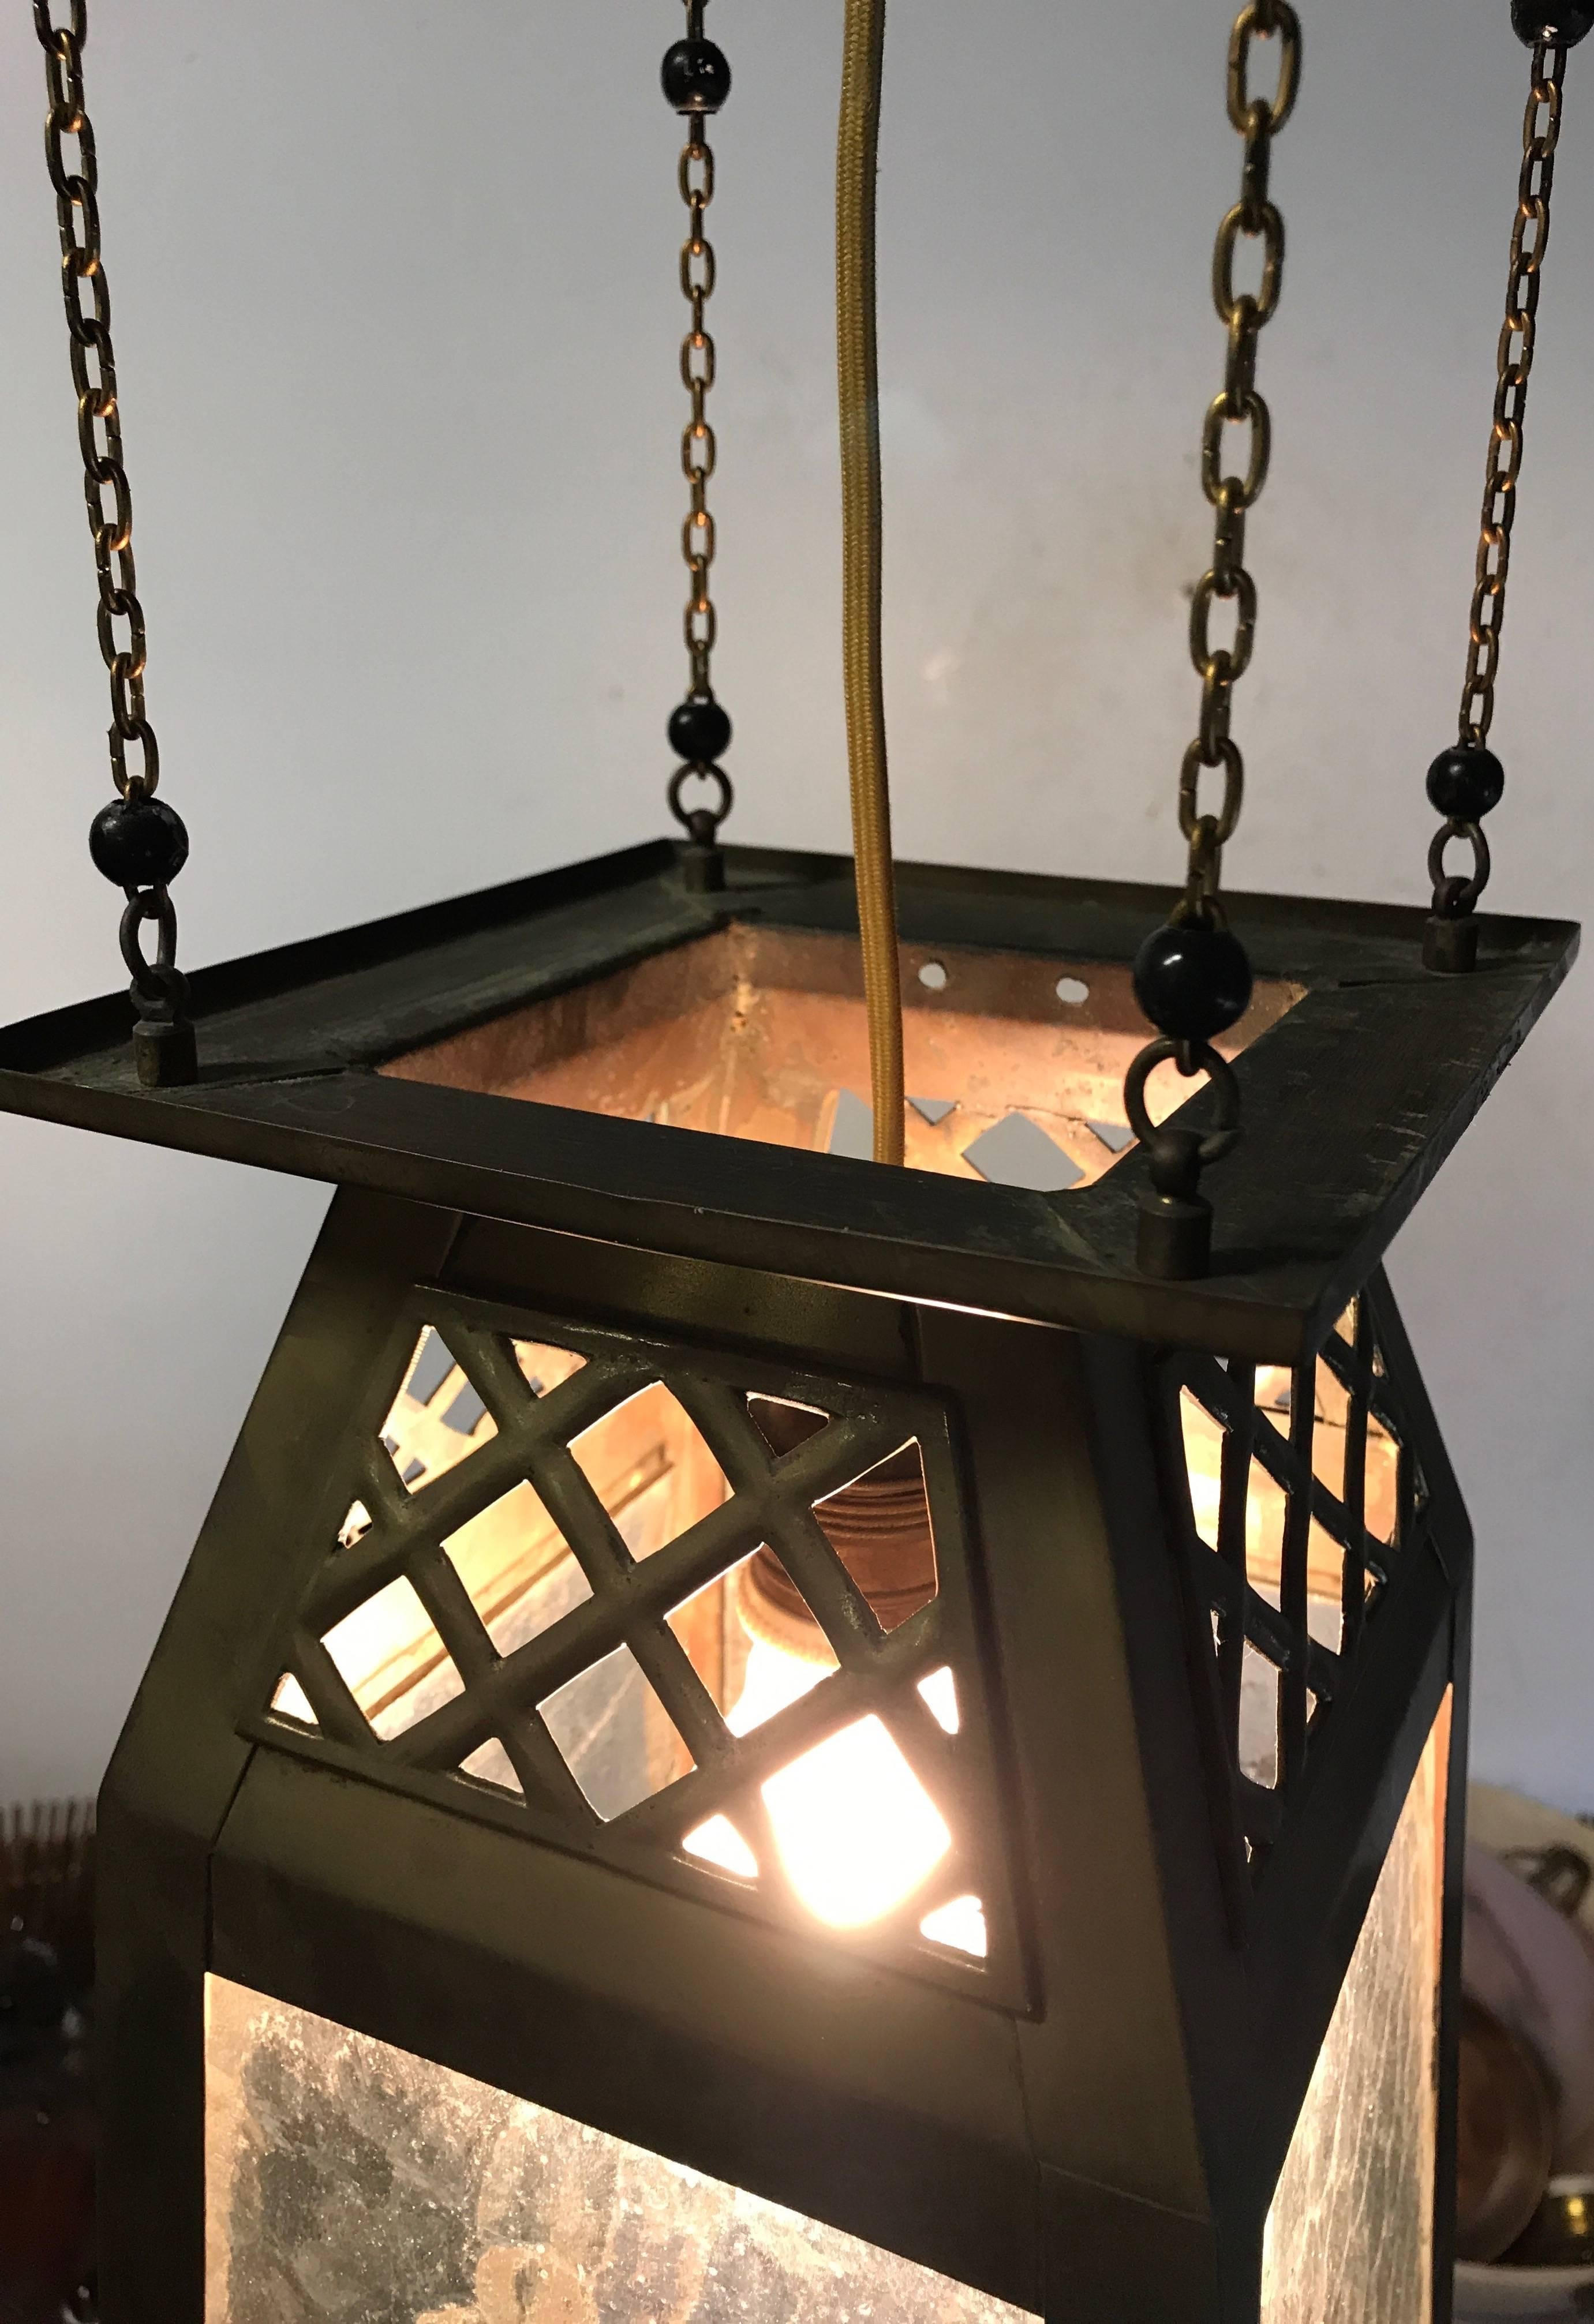 Hand-Crafted Good Looking, Early 1900s Arts and Crafts Pendant Brass and Glass Light Lantern